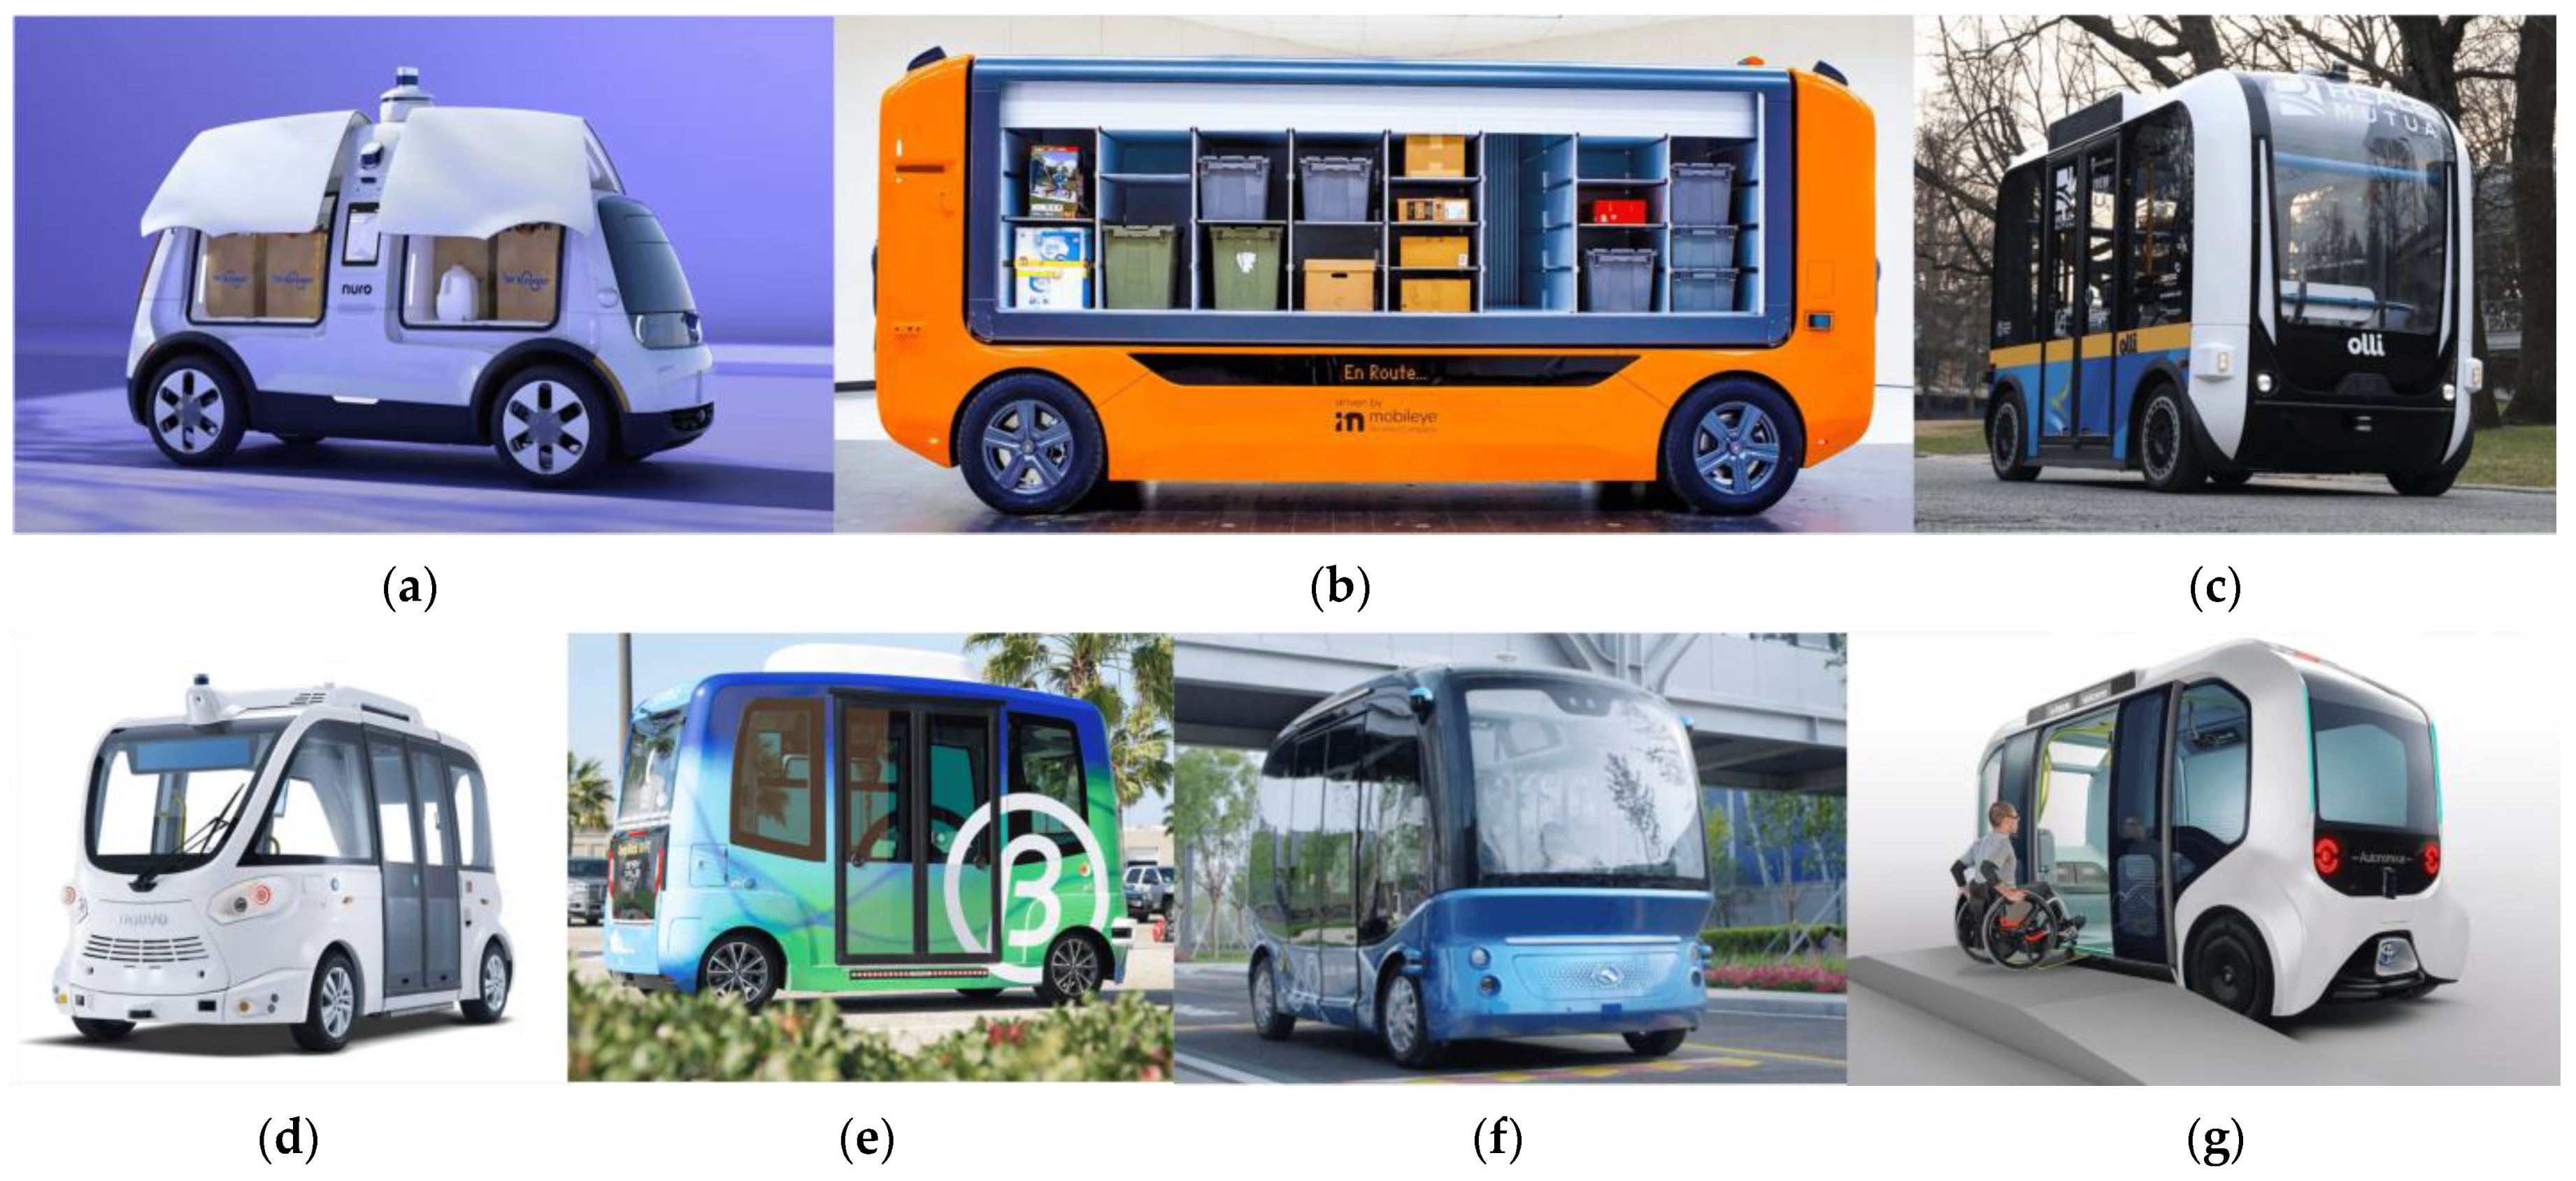 Weekend tech reading: 3D-printed, self-driving minibus unveiled